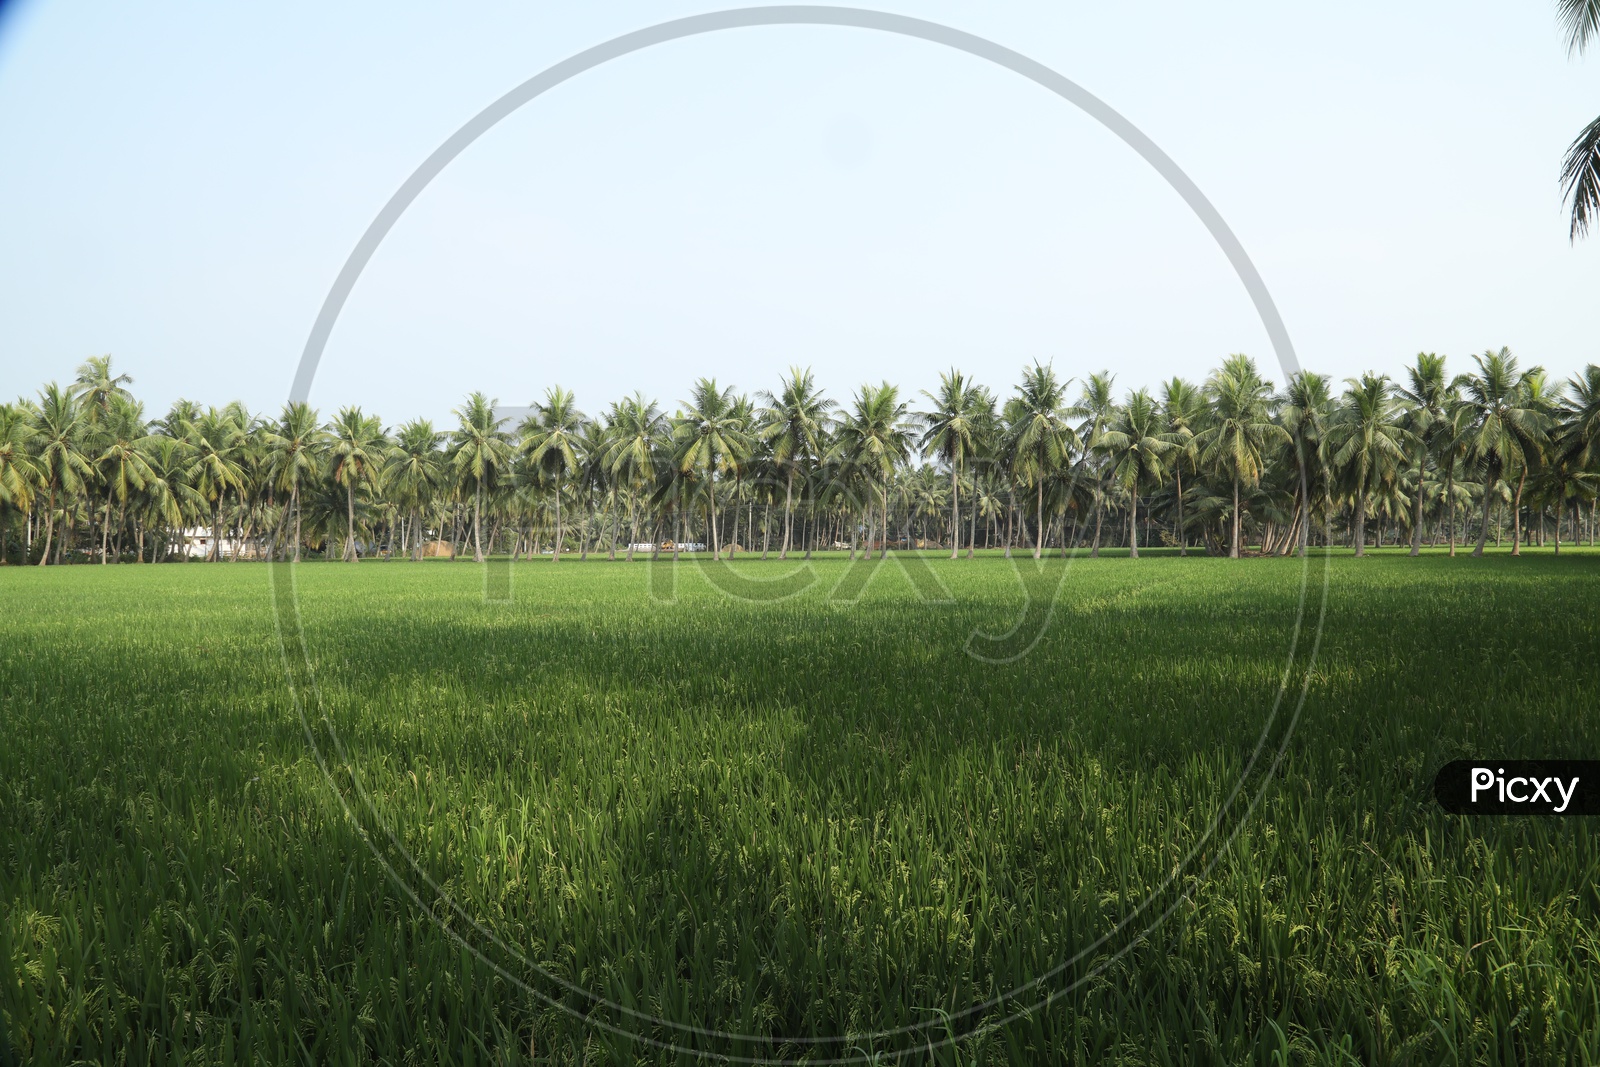 Paddy agriculture field with coconut trees in the background